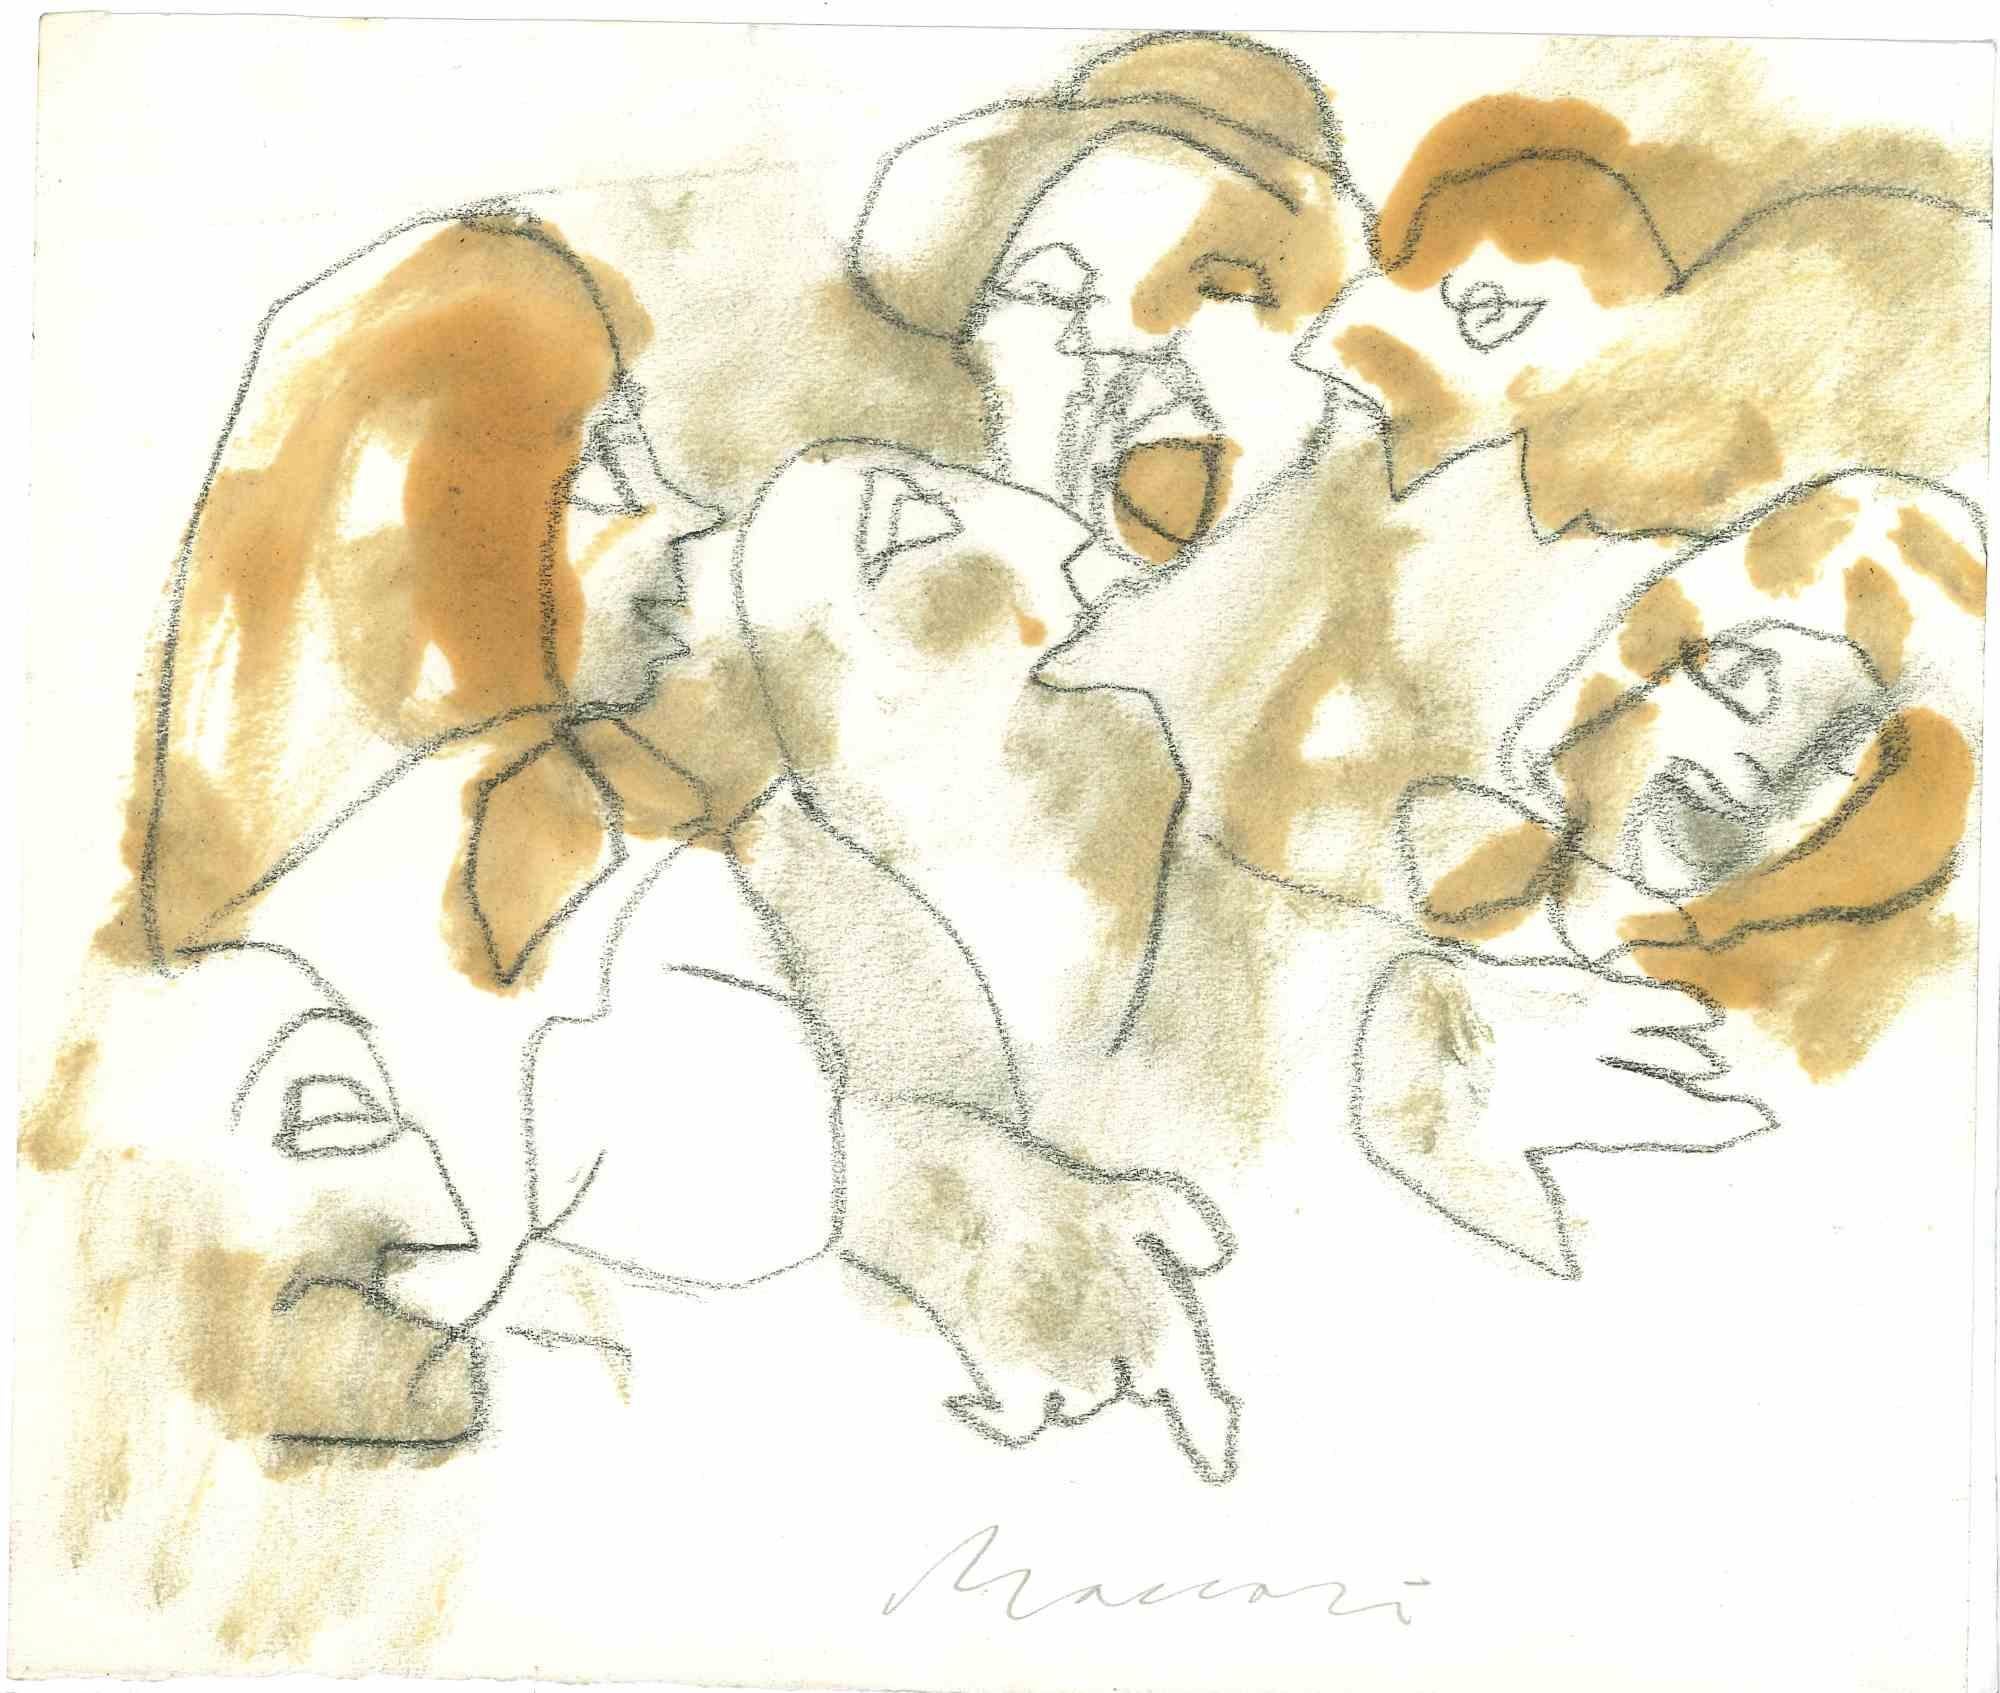 Conviviality is a Charcoal and watercolor Drawing realized by Mino Maccari  (1924-1989) in the Mid-20th Century.

Hand-signed on the lower.

Good conditions.

Mino Maccari (Siena, 1924-Rome, June 16, 1989) was an Italian writer, painter, engraver